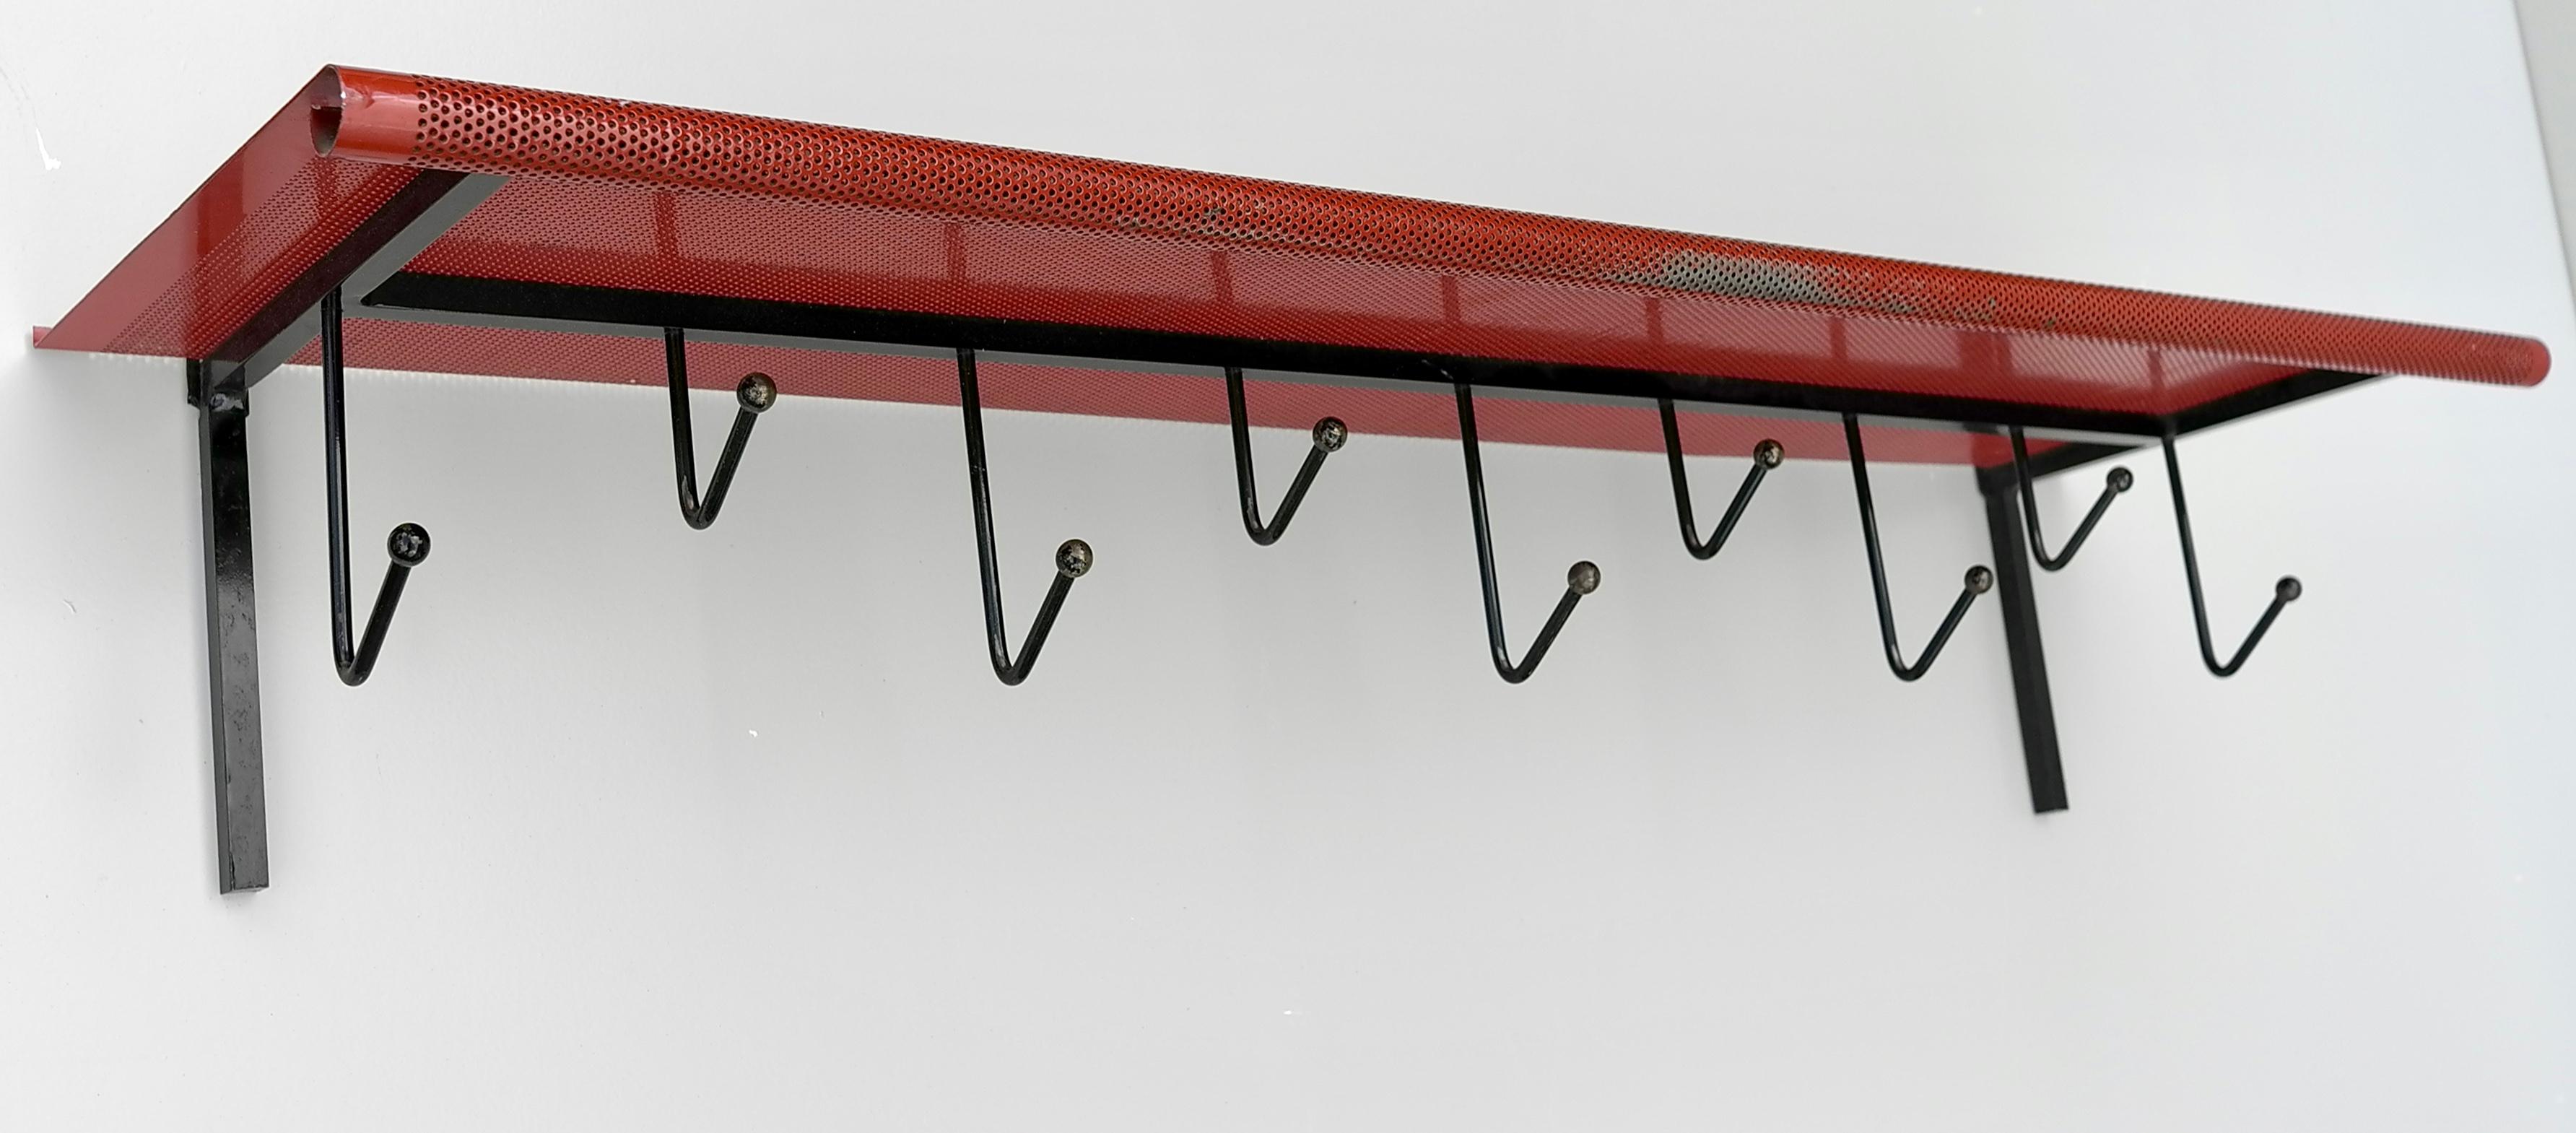 Mathieu Matégot black and Red coat rack for Artimeta the Netherlands 1950s.
Painted black and Red metal with brass ball ends each hook. In very good vintage condition, all original paint.

Documented in the Artimeta catalog.

